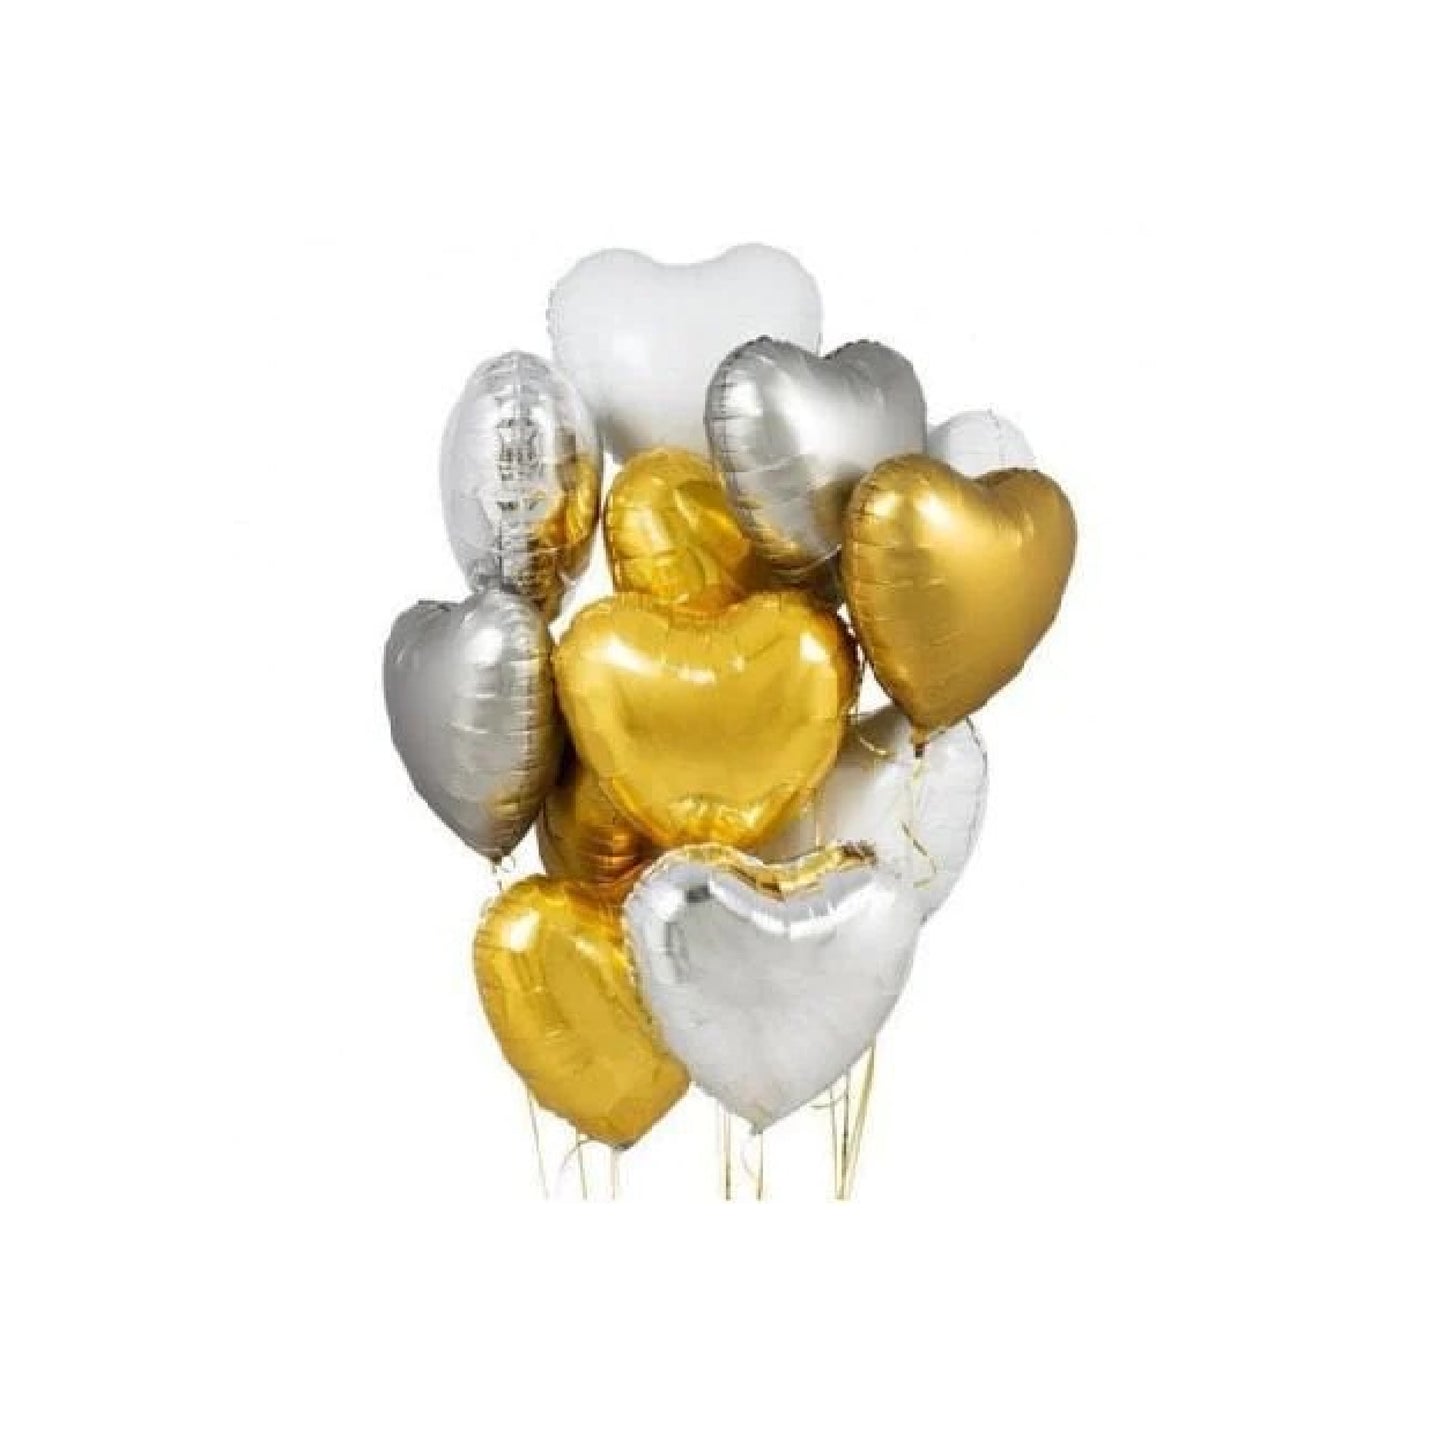 Foil Heart Balloon Bouquet of 12- Gold and Silver Theme